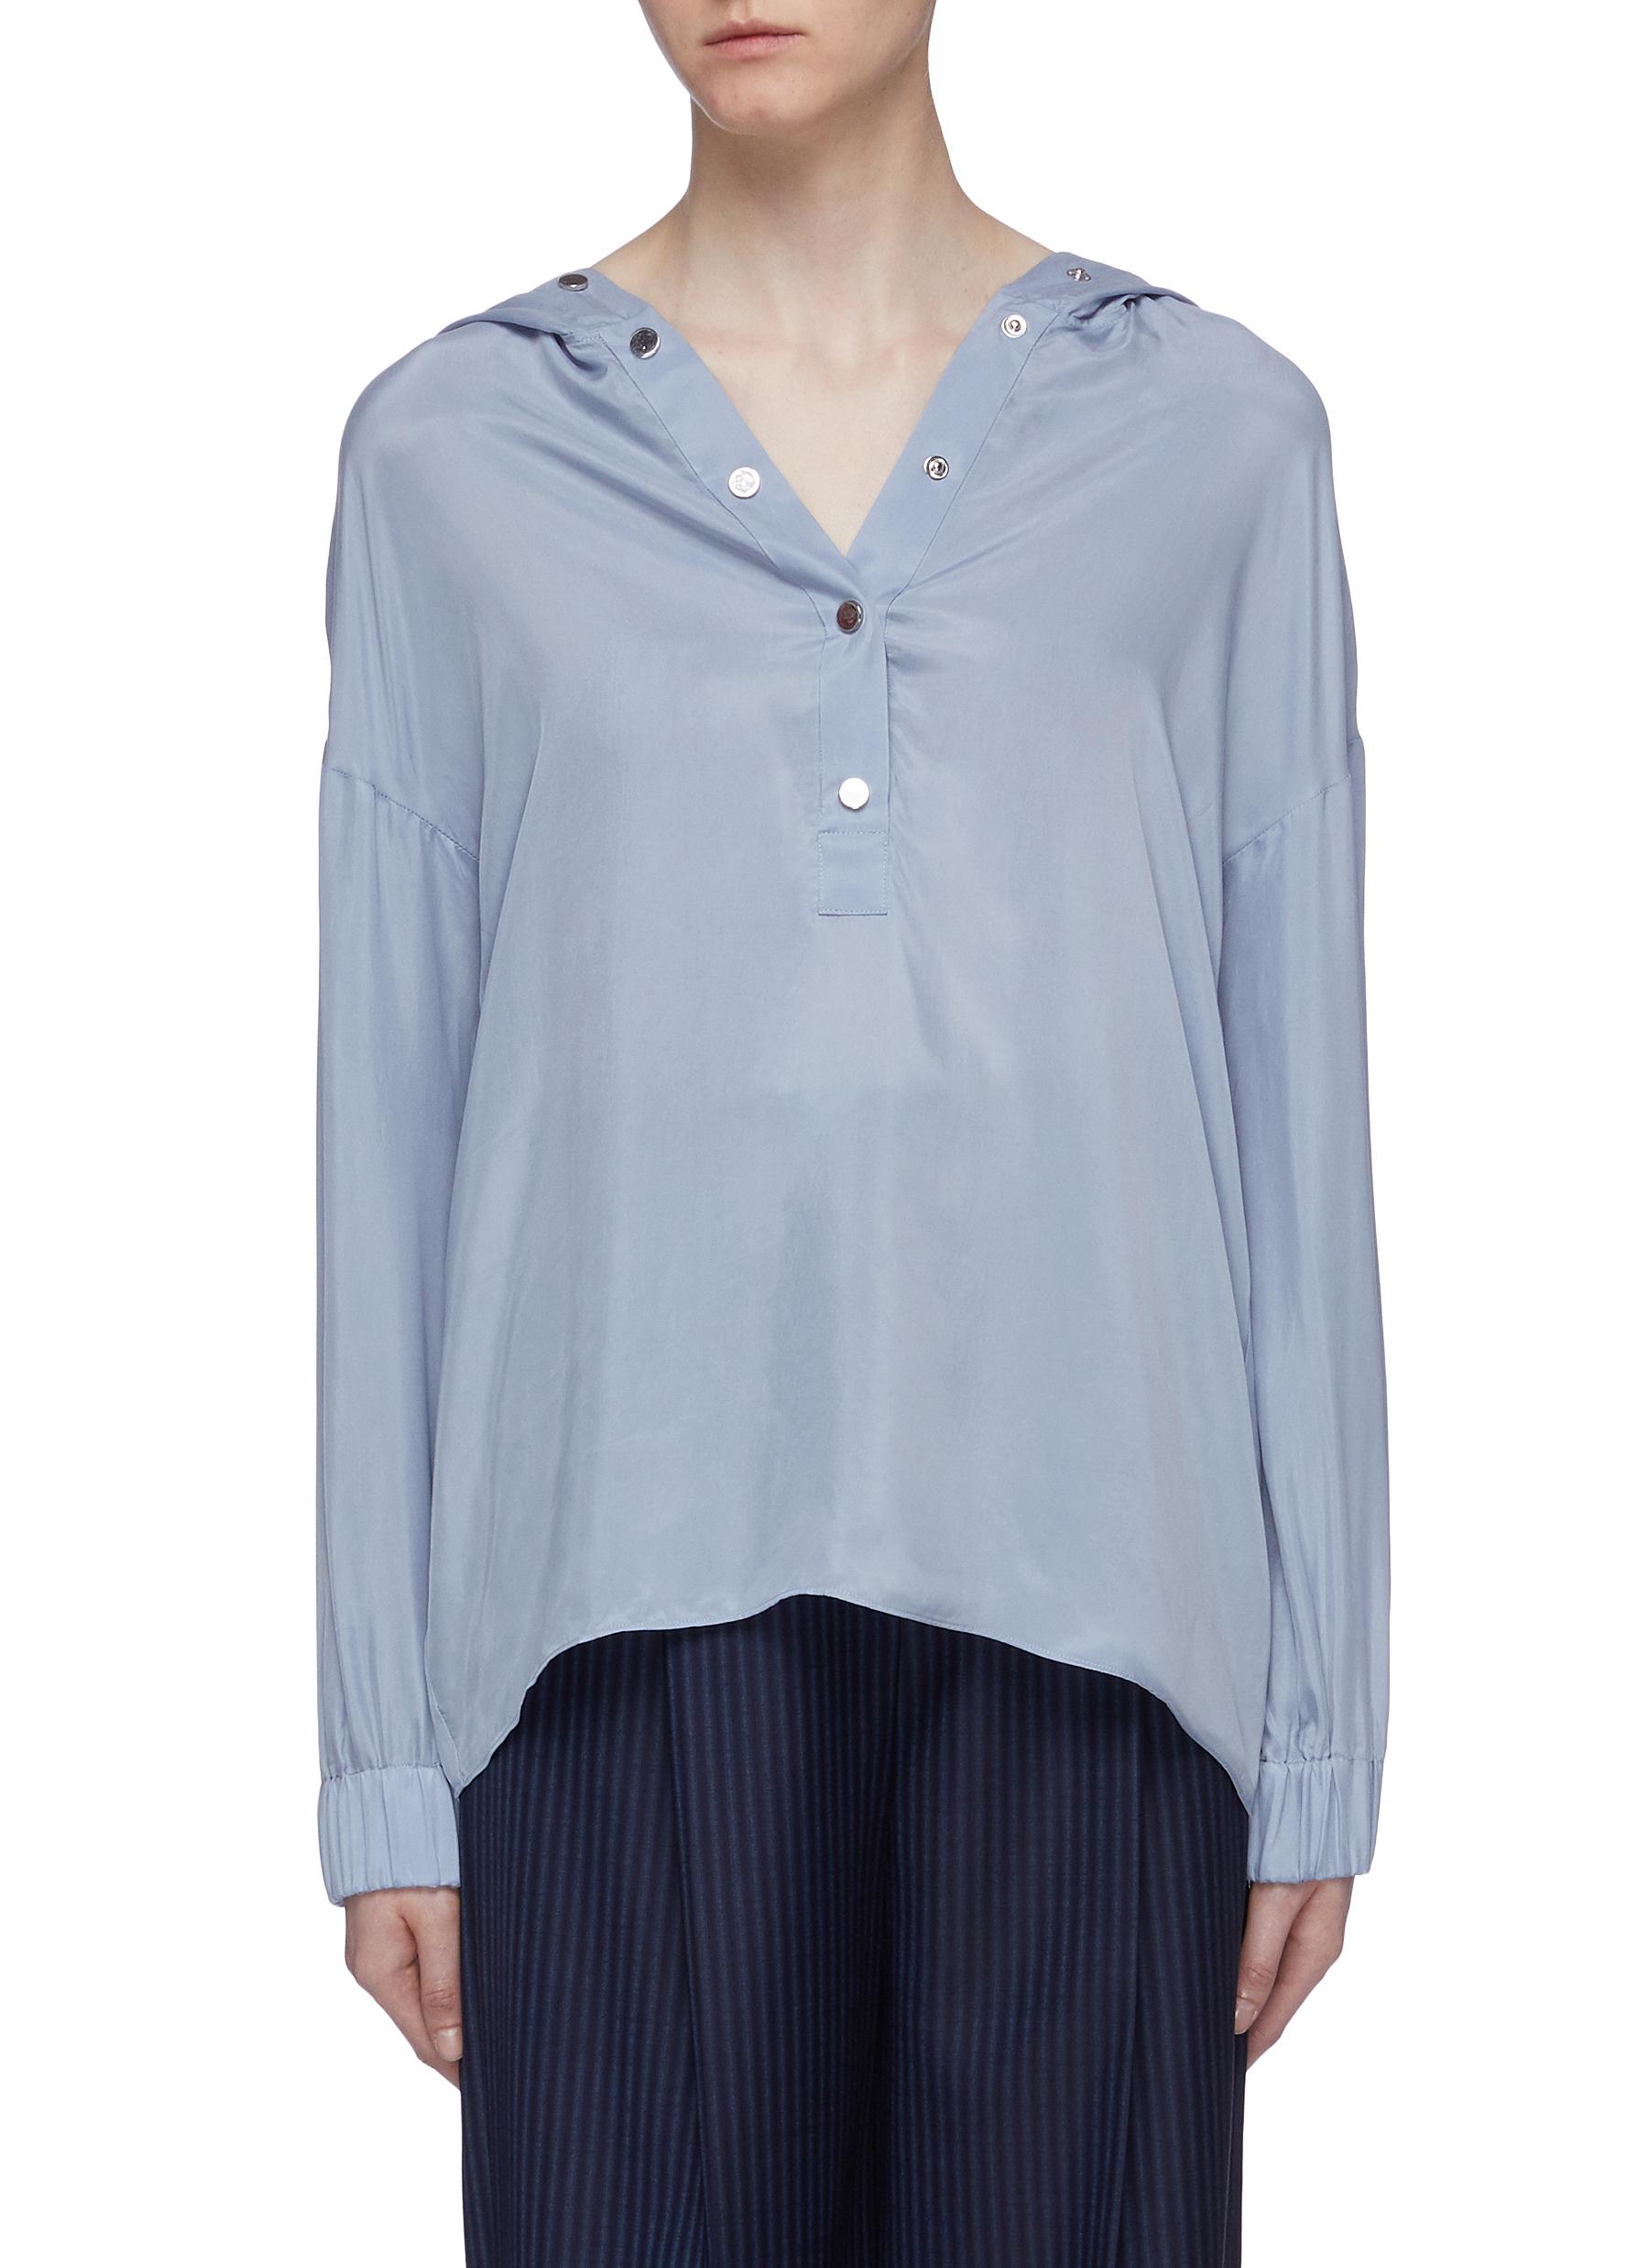 Half snap button placket hooded top by Tibi